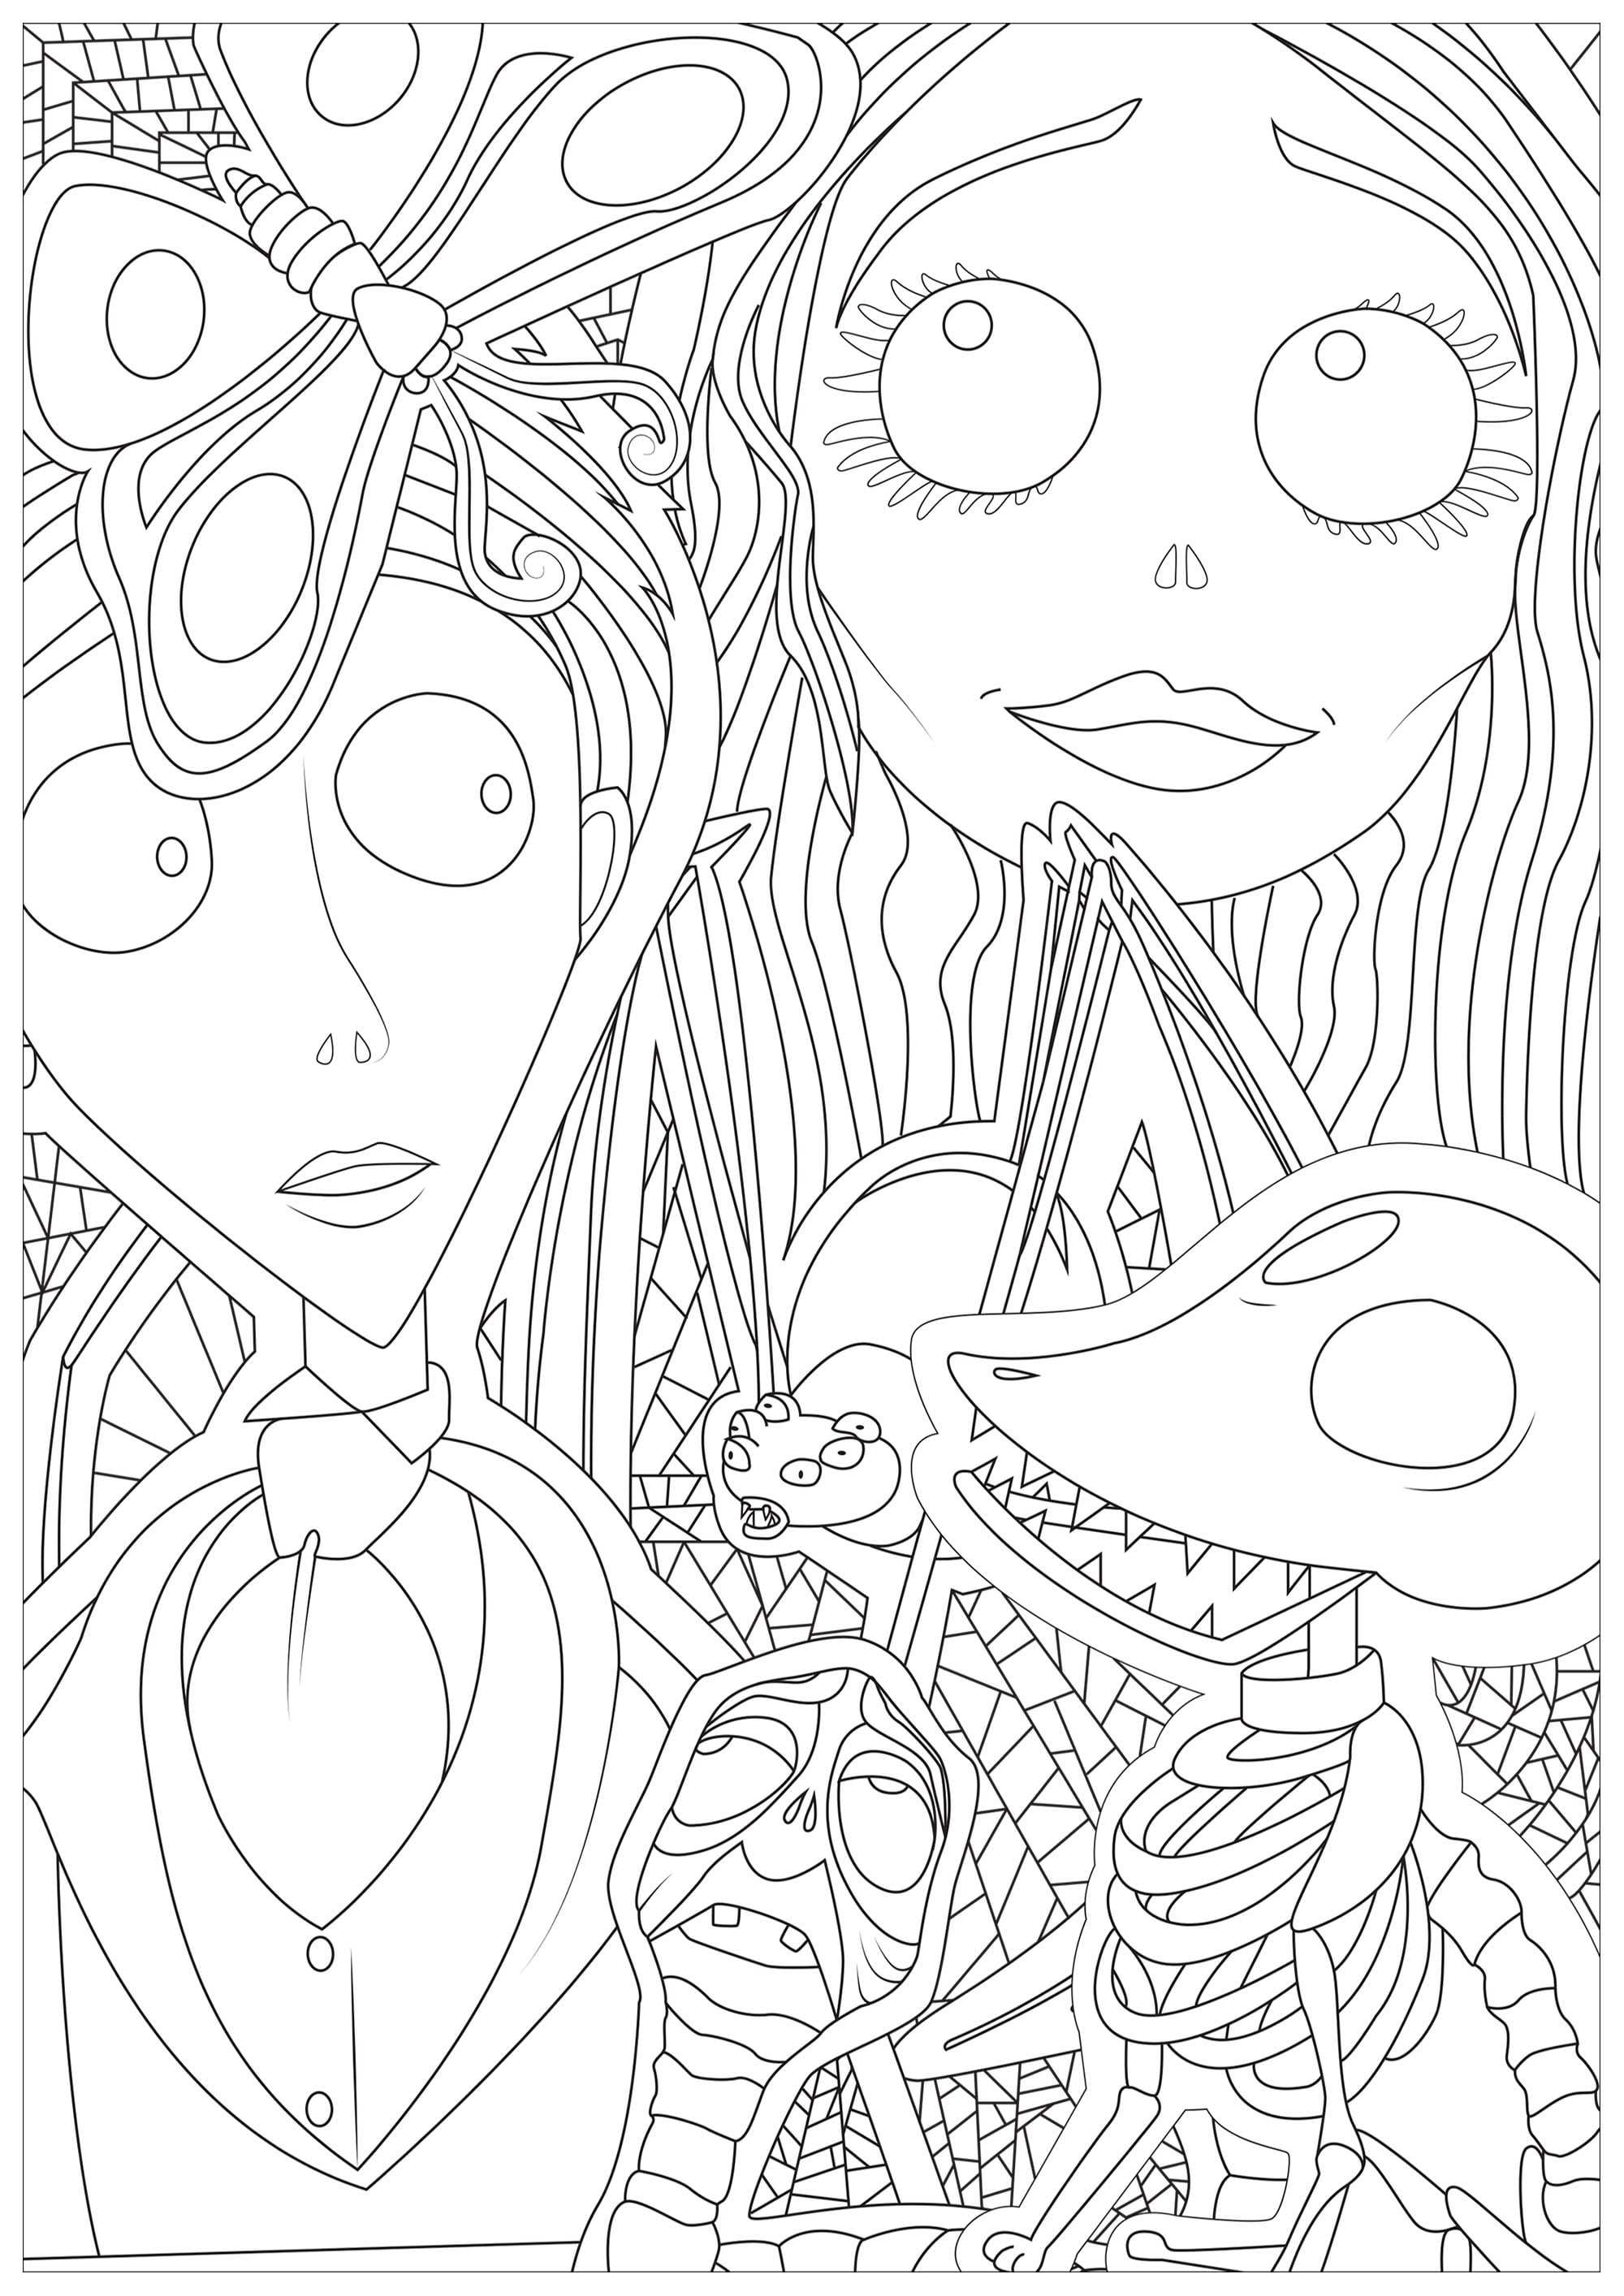 Printable Halloween Coloring Pages For Adults   POPSUGAR Smart Living